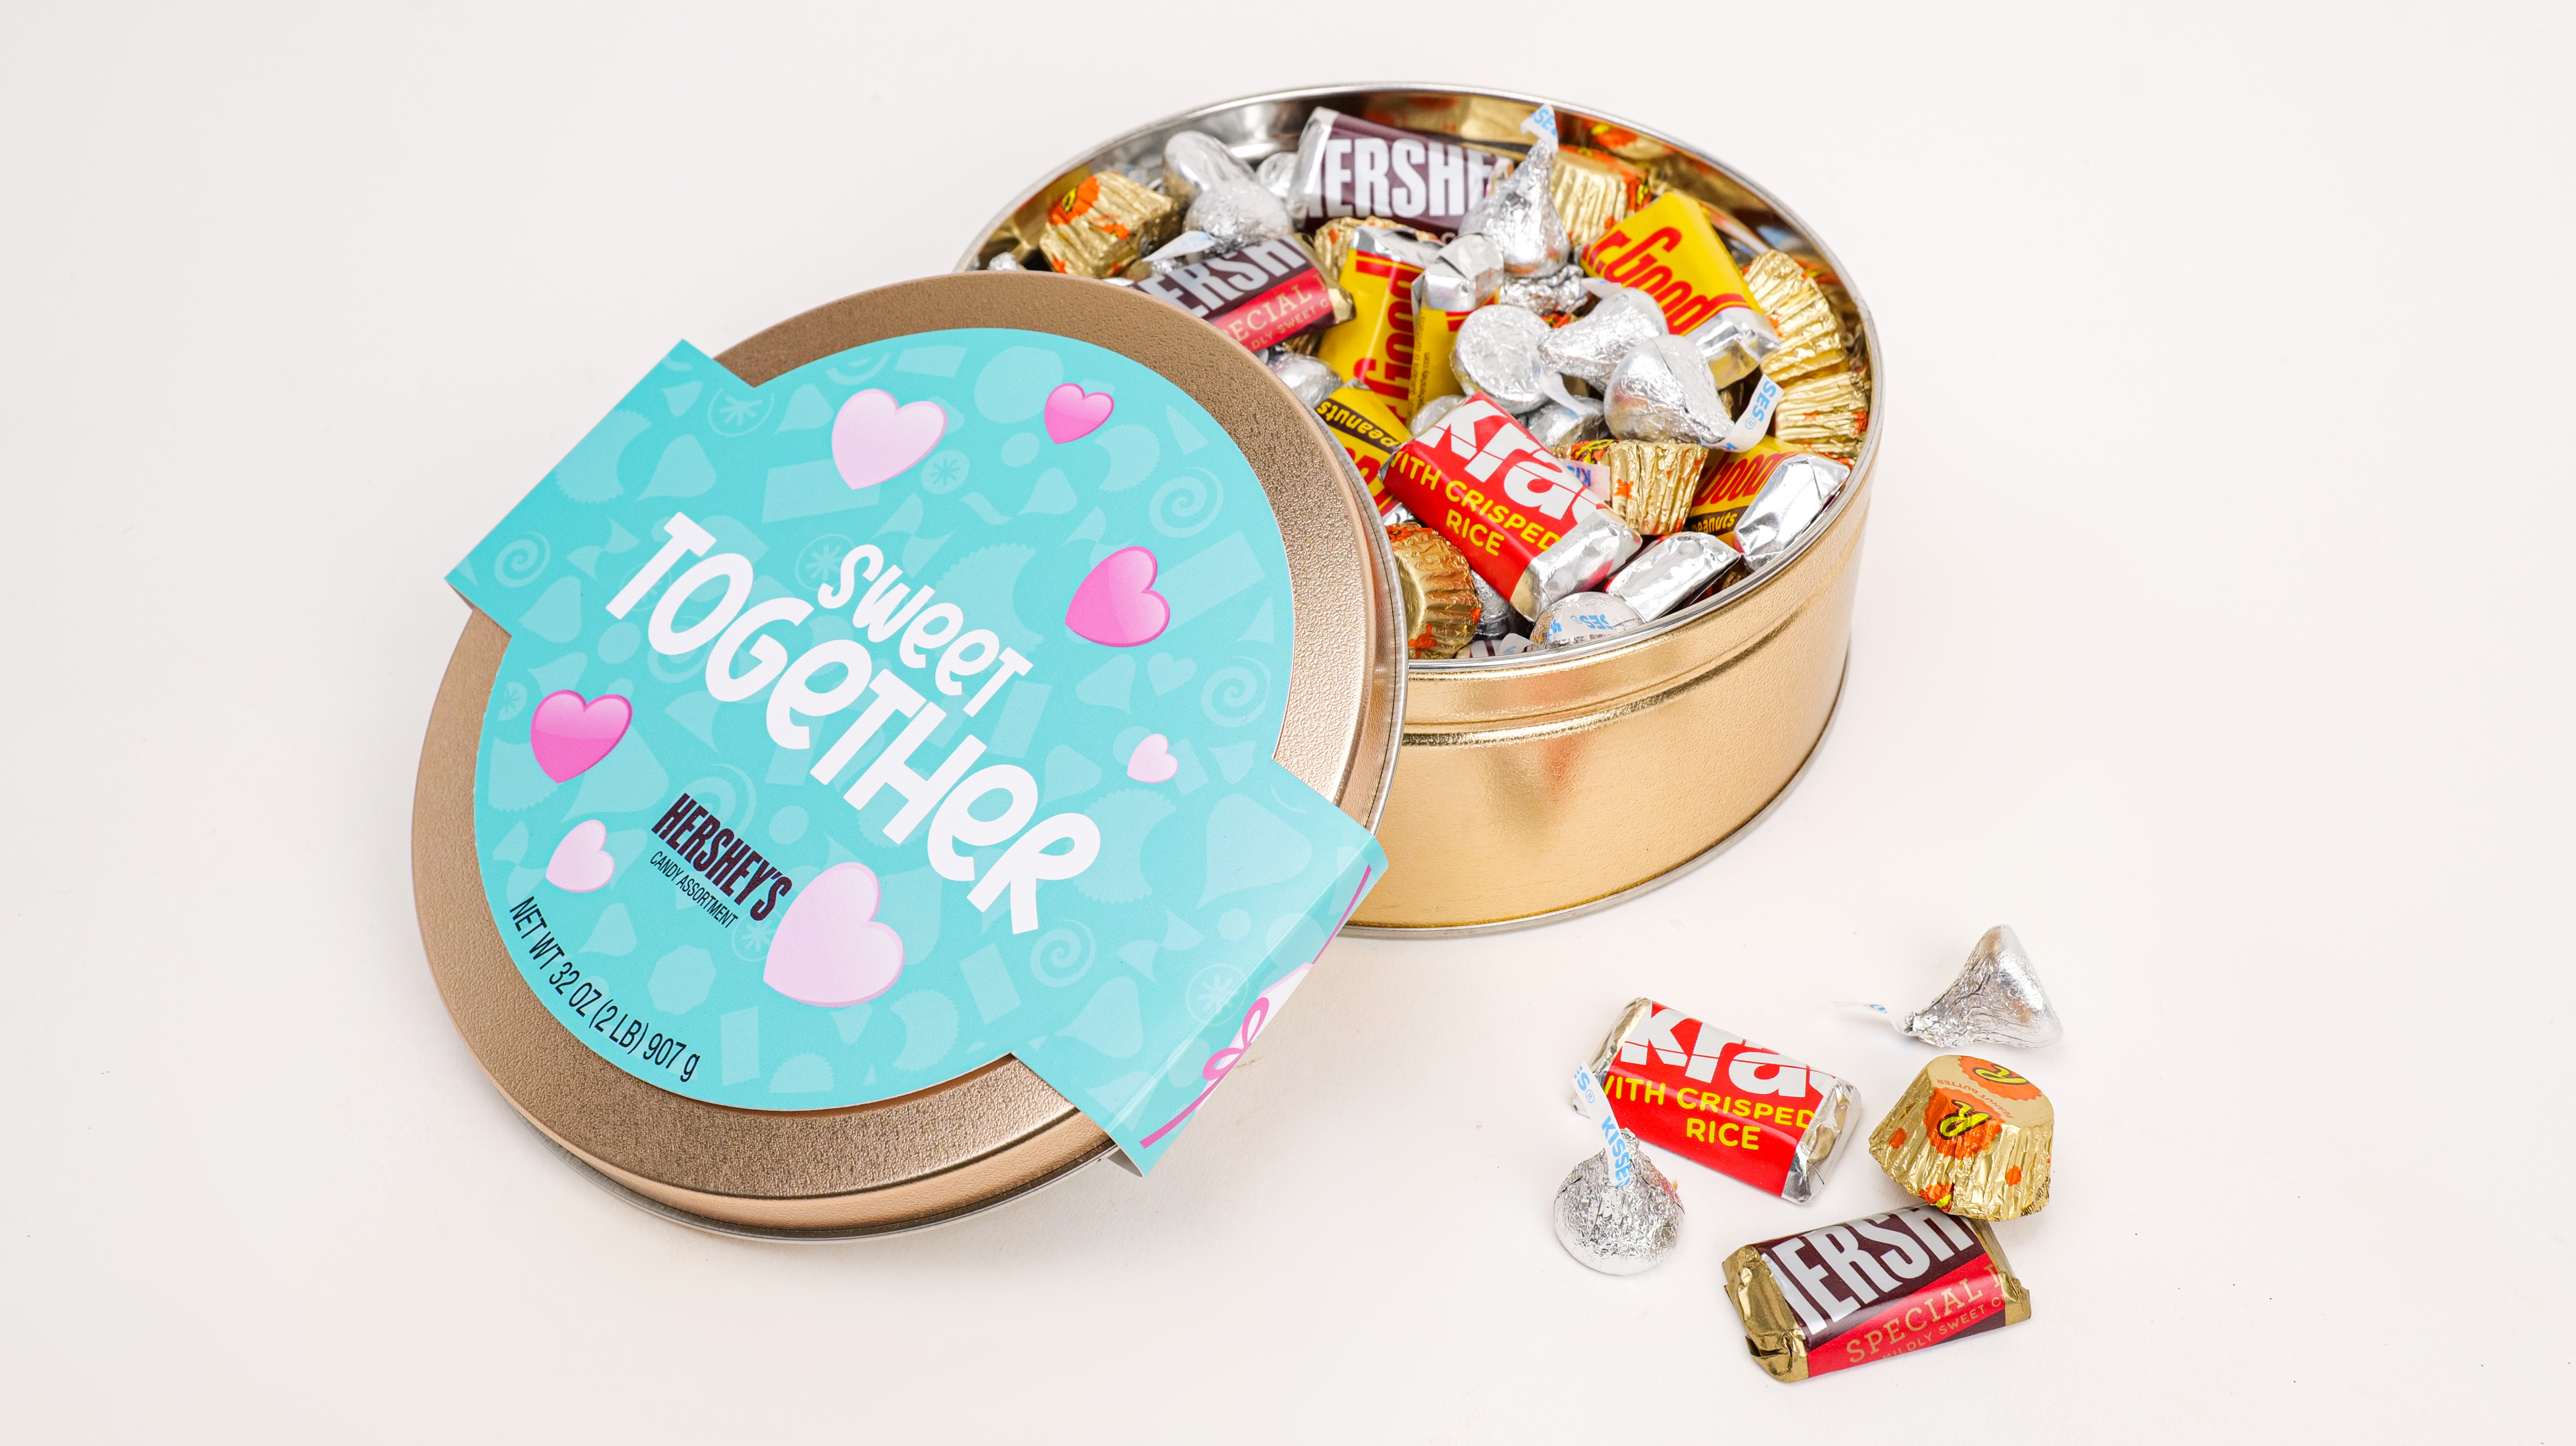 Hello Sweet Candy Box - Sweet Candy Assortment